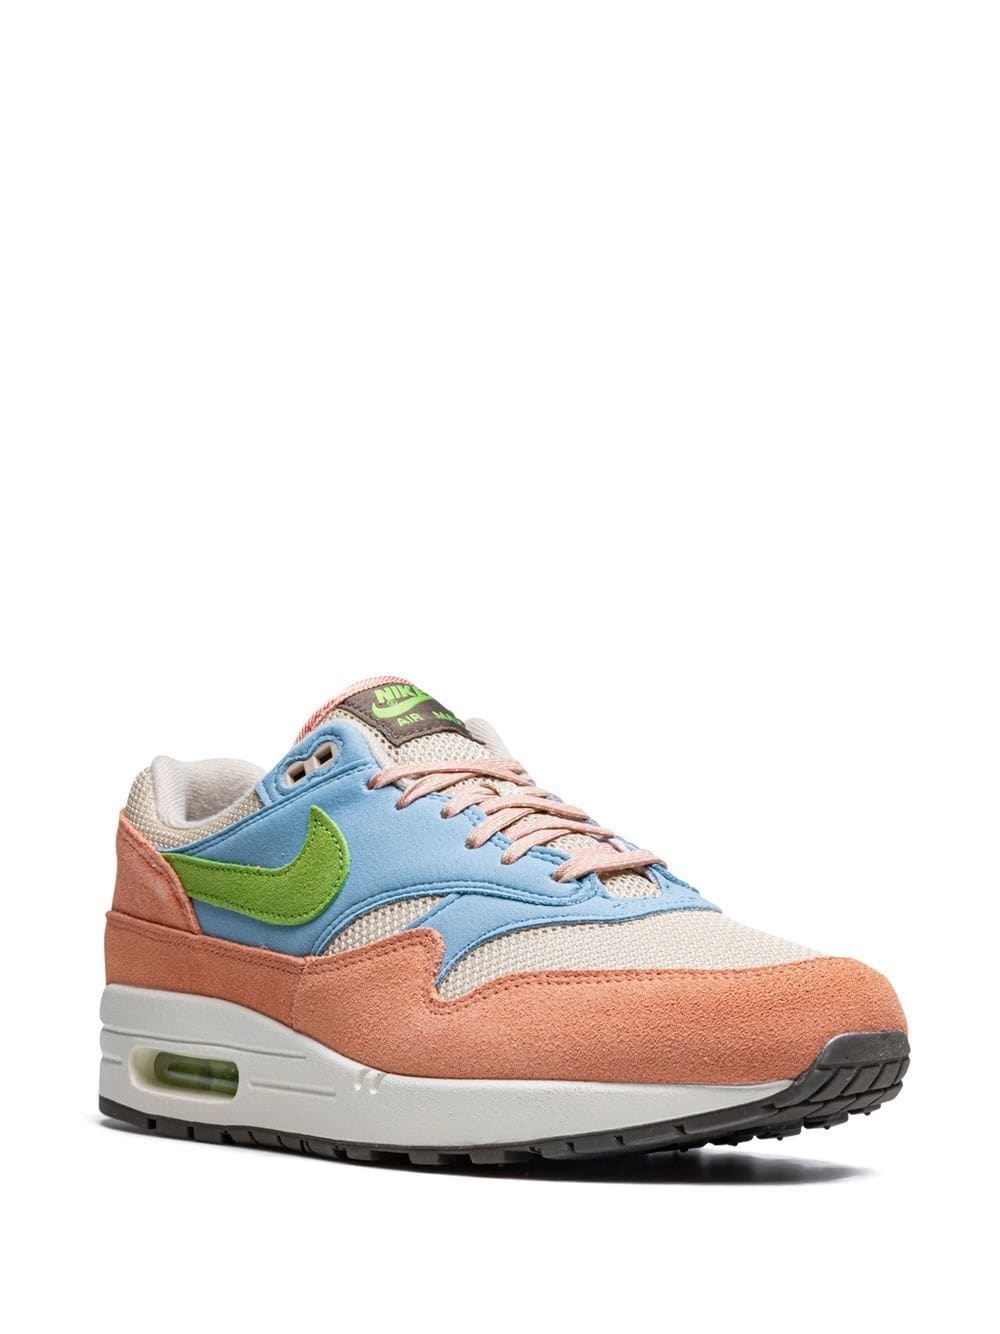 Air Max 1 "Light Madder Root" sneakers - 2